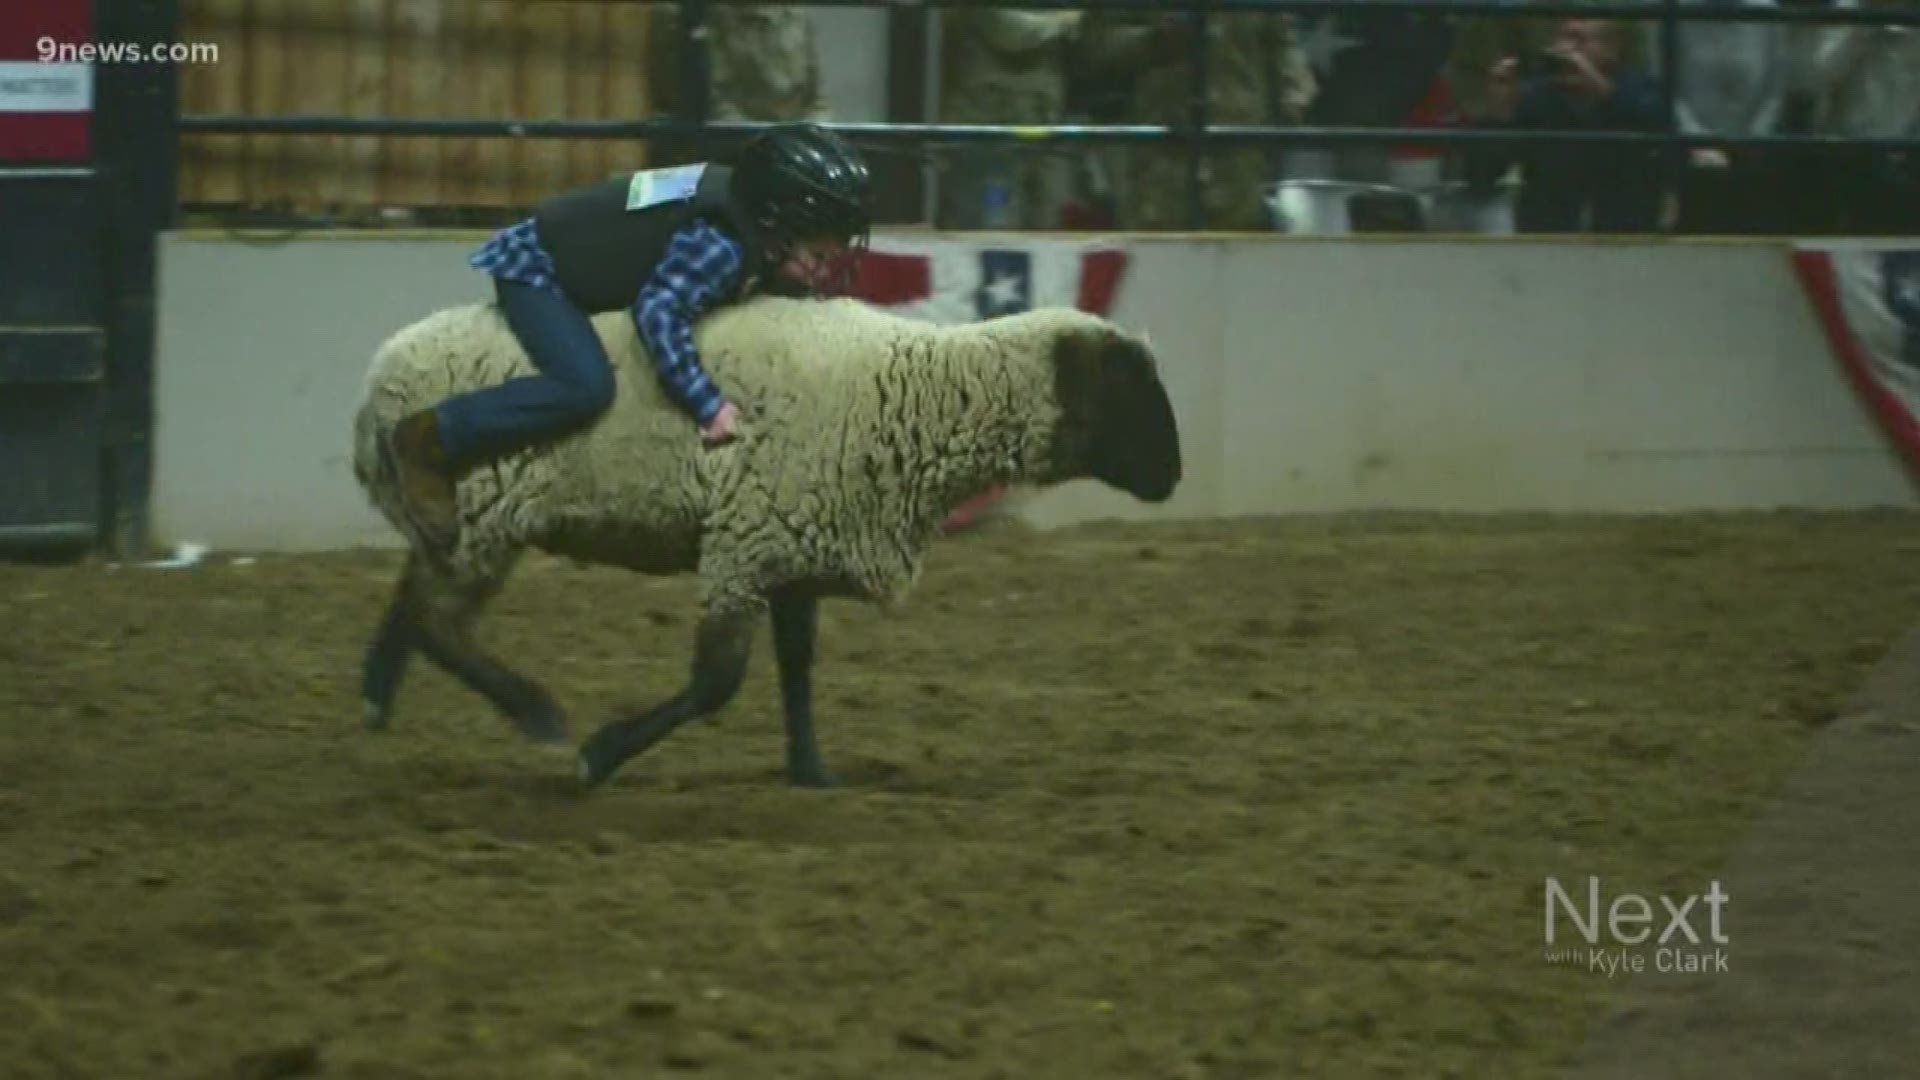 Not even the main event at the stock show is this entertaining. It's hard to beat a 6-year-old on a sheep in slow-motion.